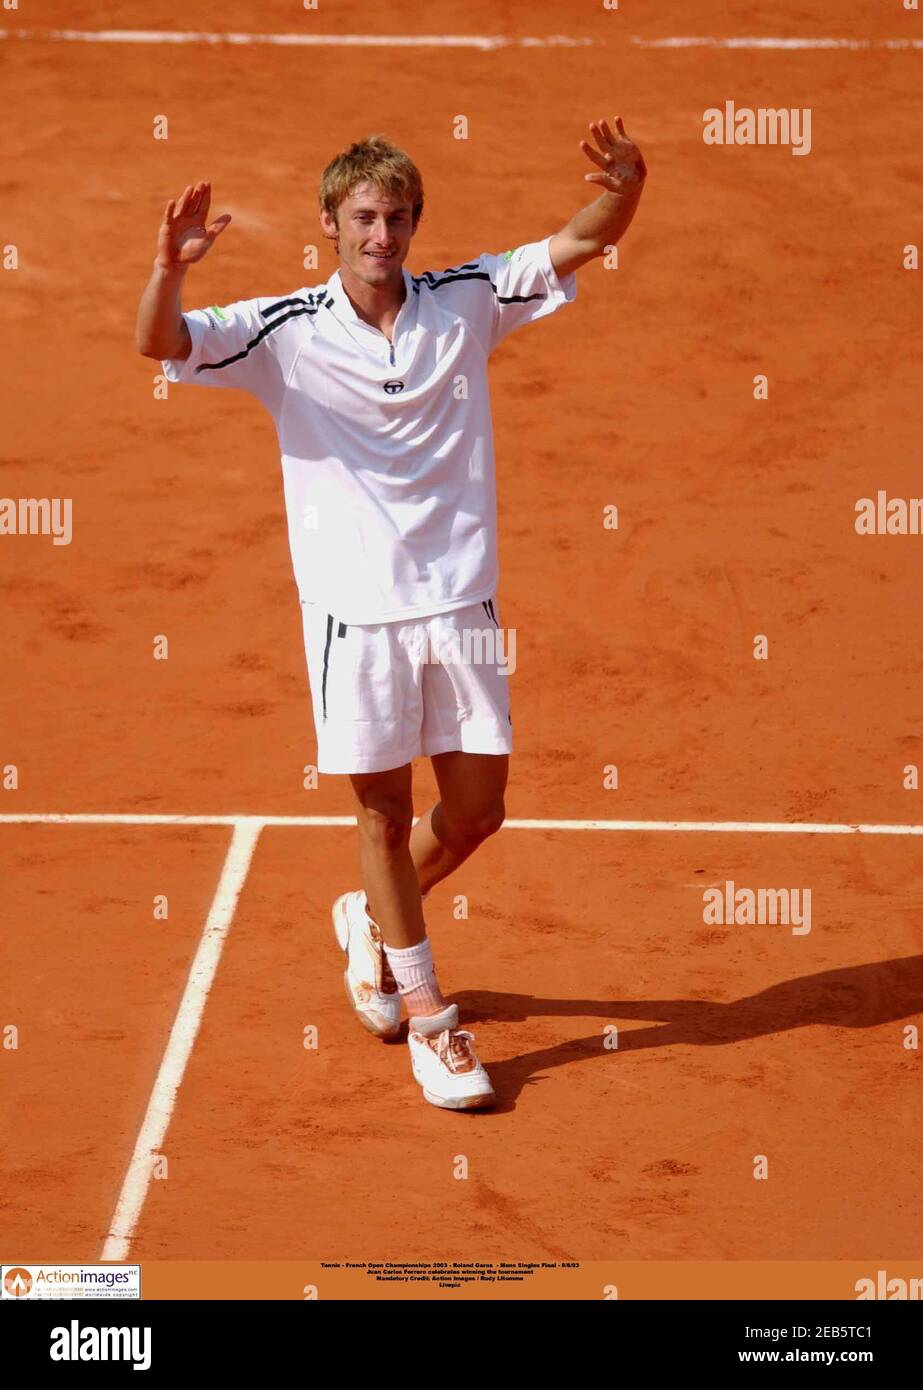 Tennis - French Open Championships 2003 - Roland Garros - Mens Singles Final  - 8/6/03 Juan Carlos Ferrero celebrates winning the tournament Mandatory  Credit: Action Images / Rudy LHomme Livepic Stock Photo - Alamy